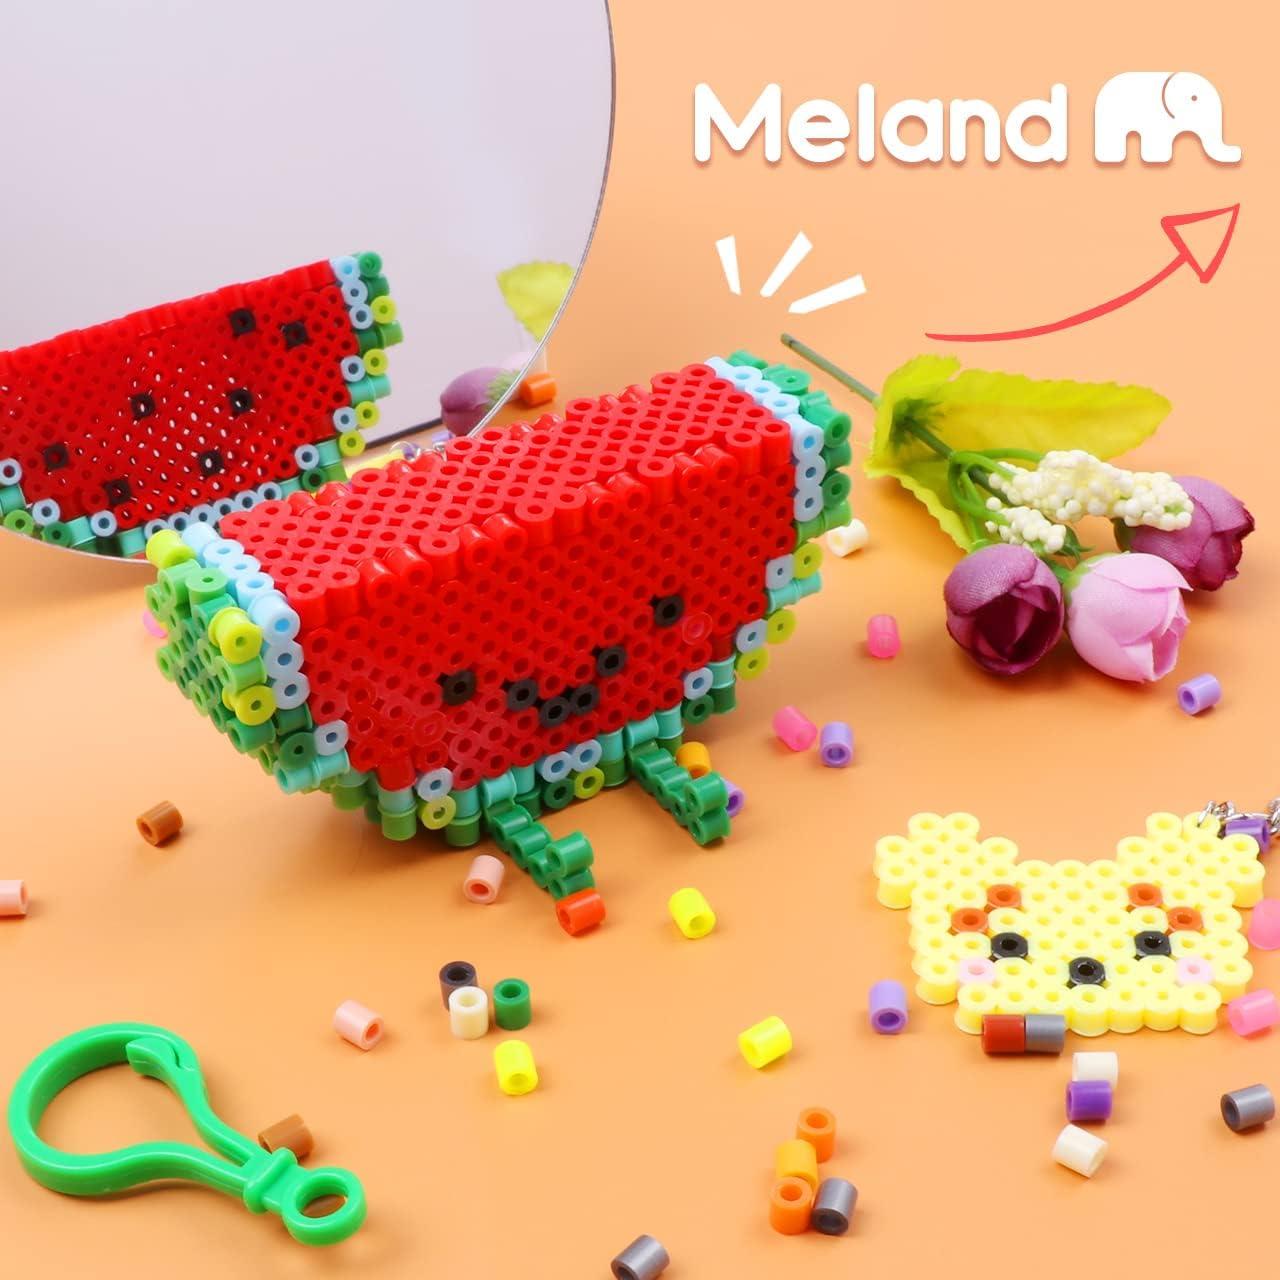  Meland Fuse Beads - 24000pcs Fuse Beads Kit for Kids, 24 Color  5MM Iron Beads Set with 4 Fluorescence Color, 6 Pegboards - Craft Kits  Gifts for Birthday Christmas : Arts, Crafts & Sewing